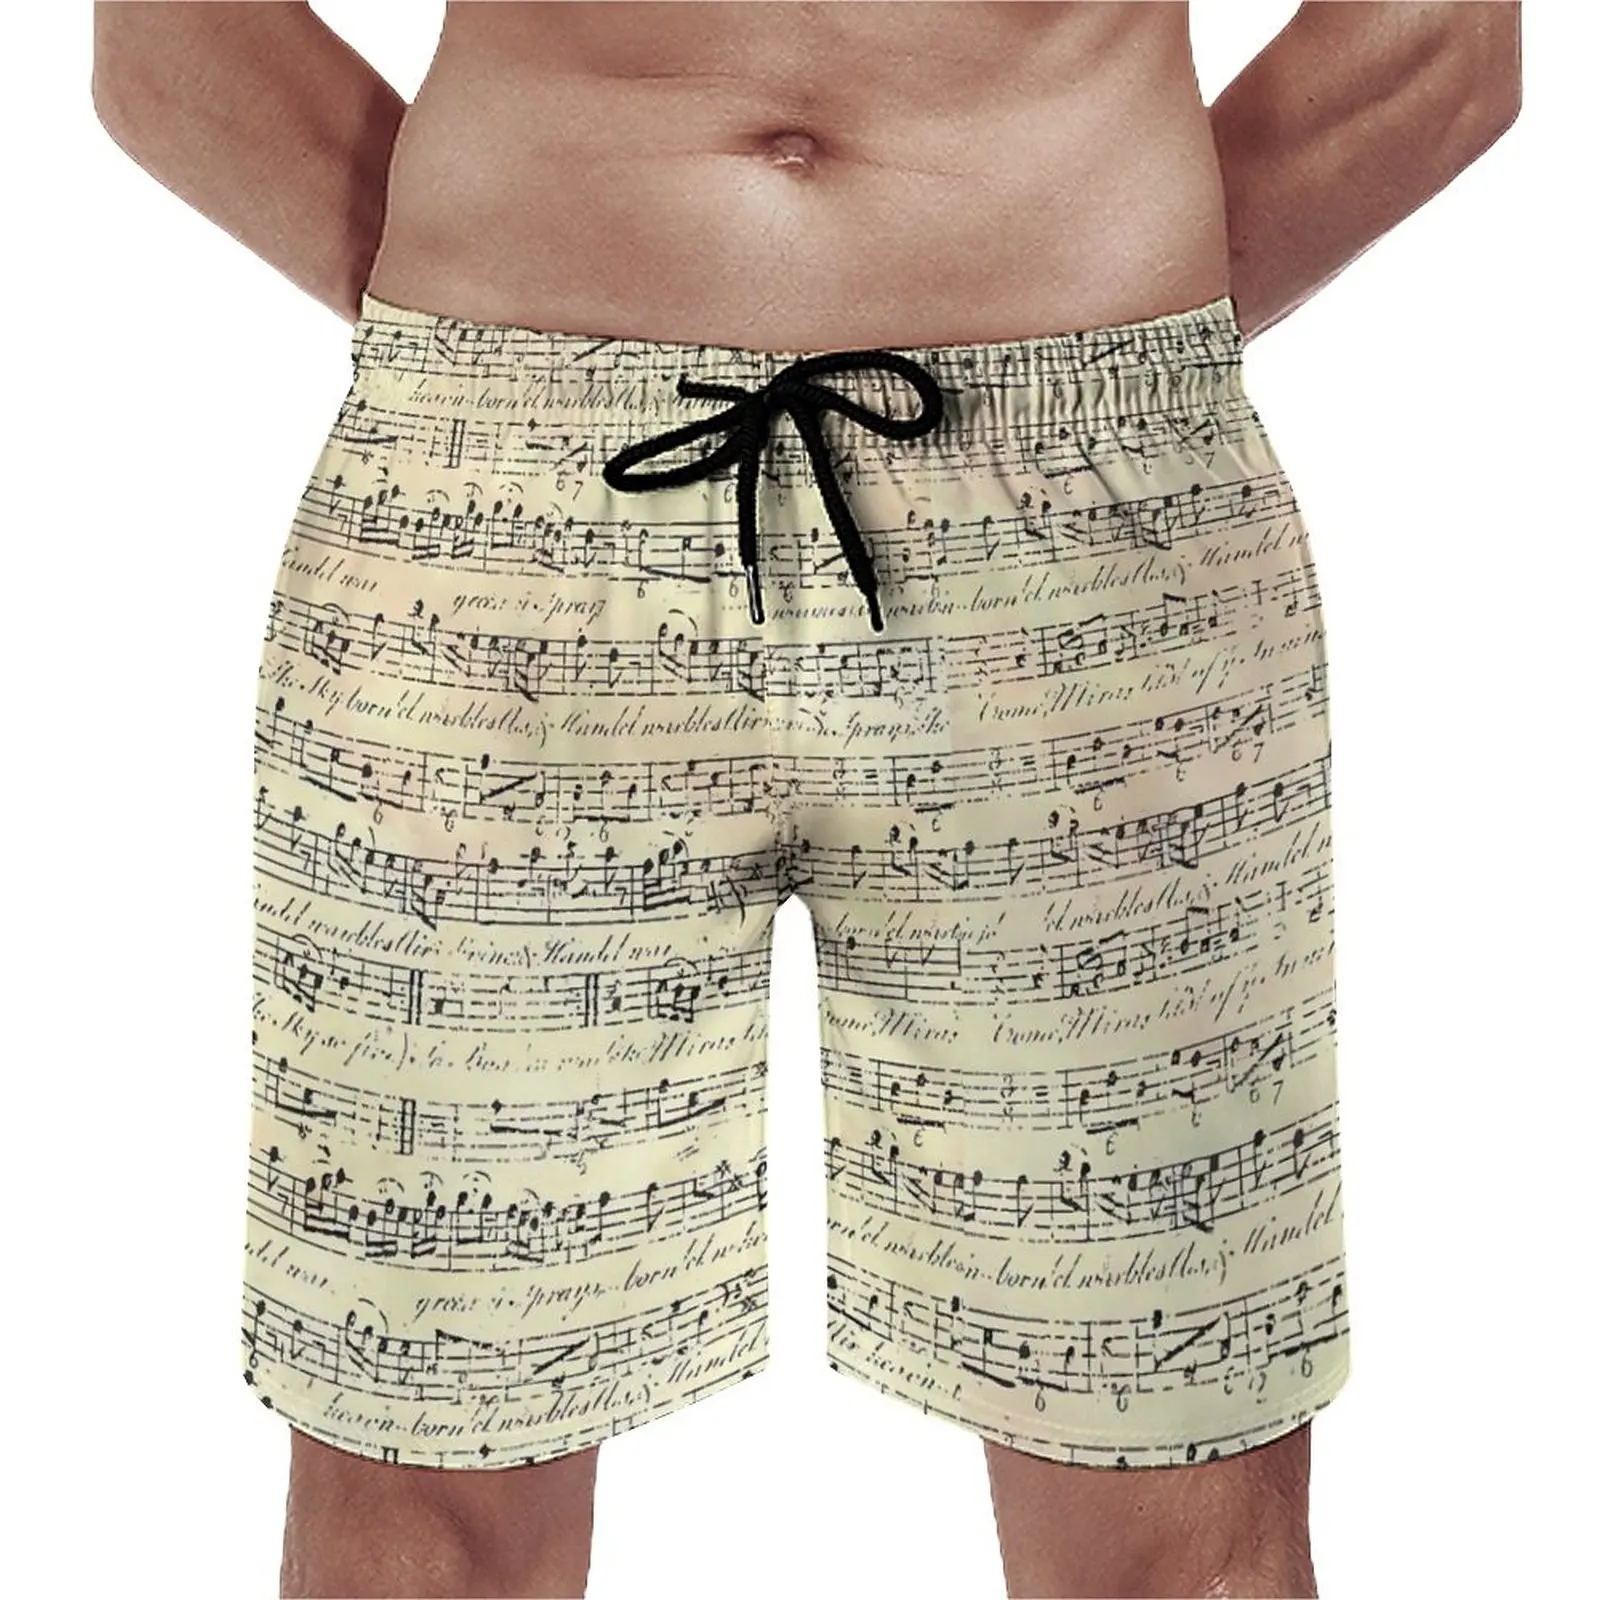 

Summer Board Shorts Vintage Music Notes Surfing Musician Print Graphic Beach Short Pants Hawaii Quick Dry Swim Trunks Plus Size